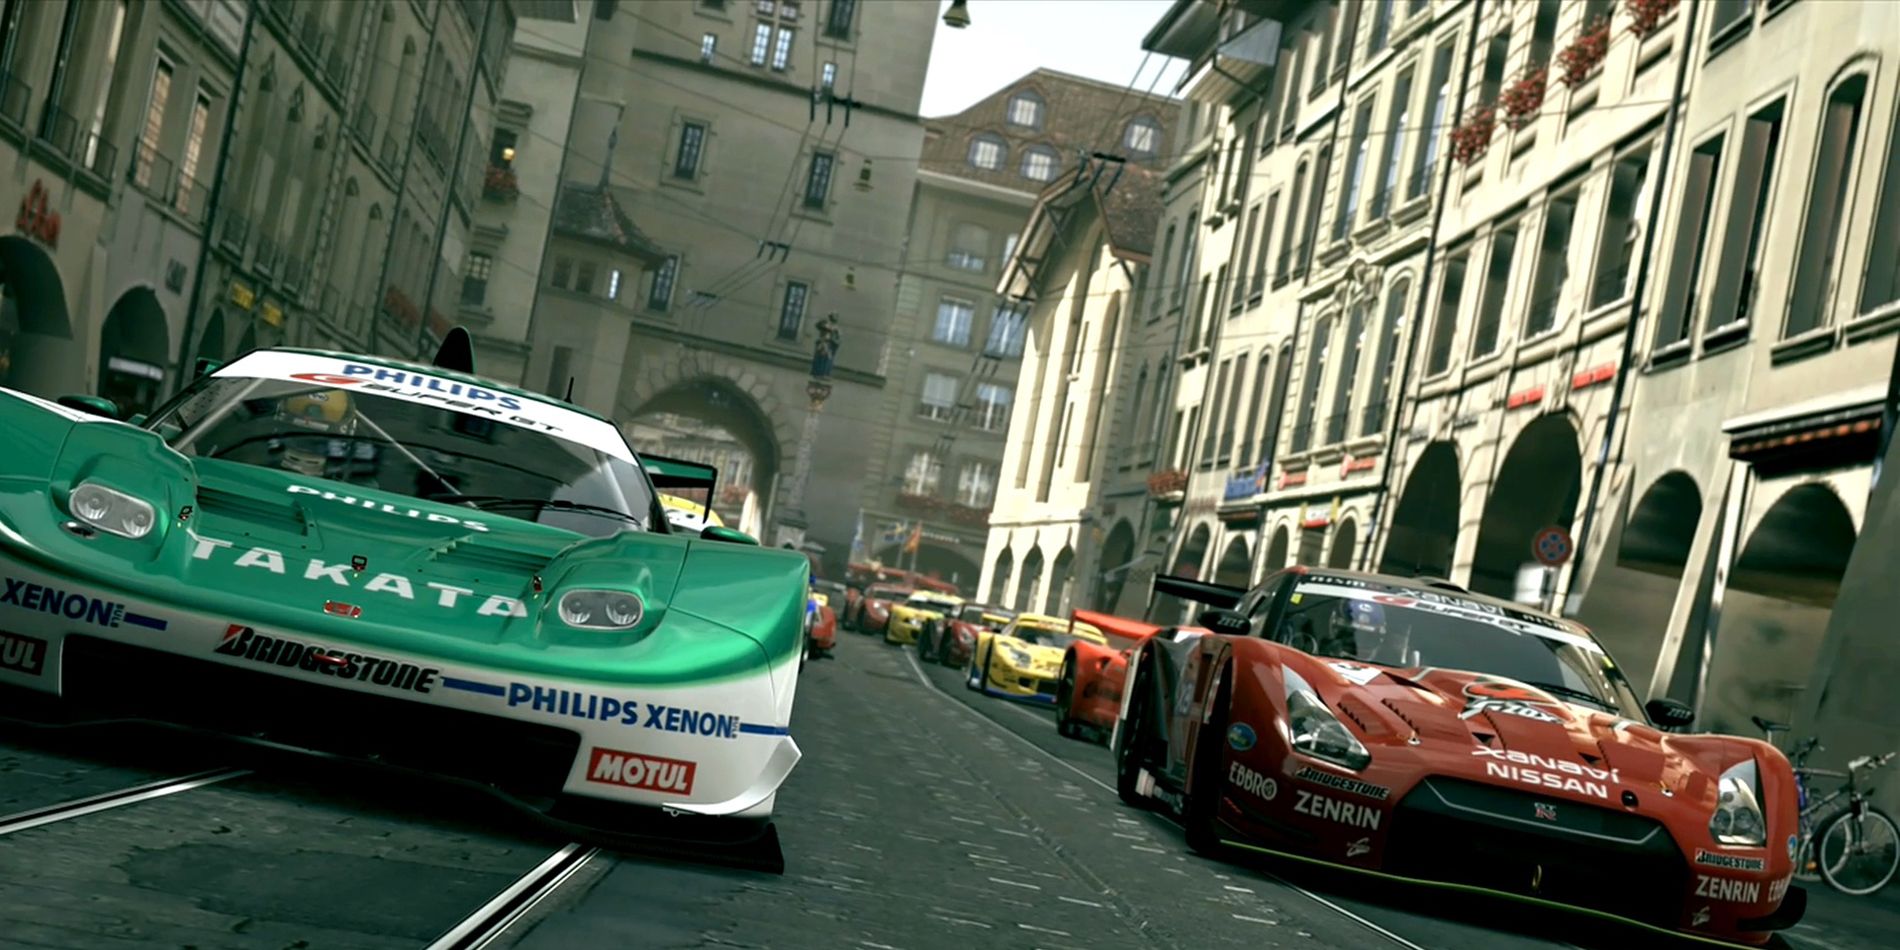 Gran Turismo 7 Confirmed to Launch on PlayStation 4 and PlayStation 5 –  GTPlanet, gran turismo 7 ps4 to ps5 upgrade 